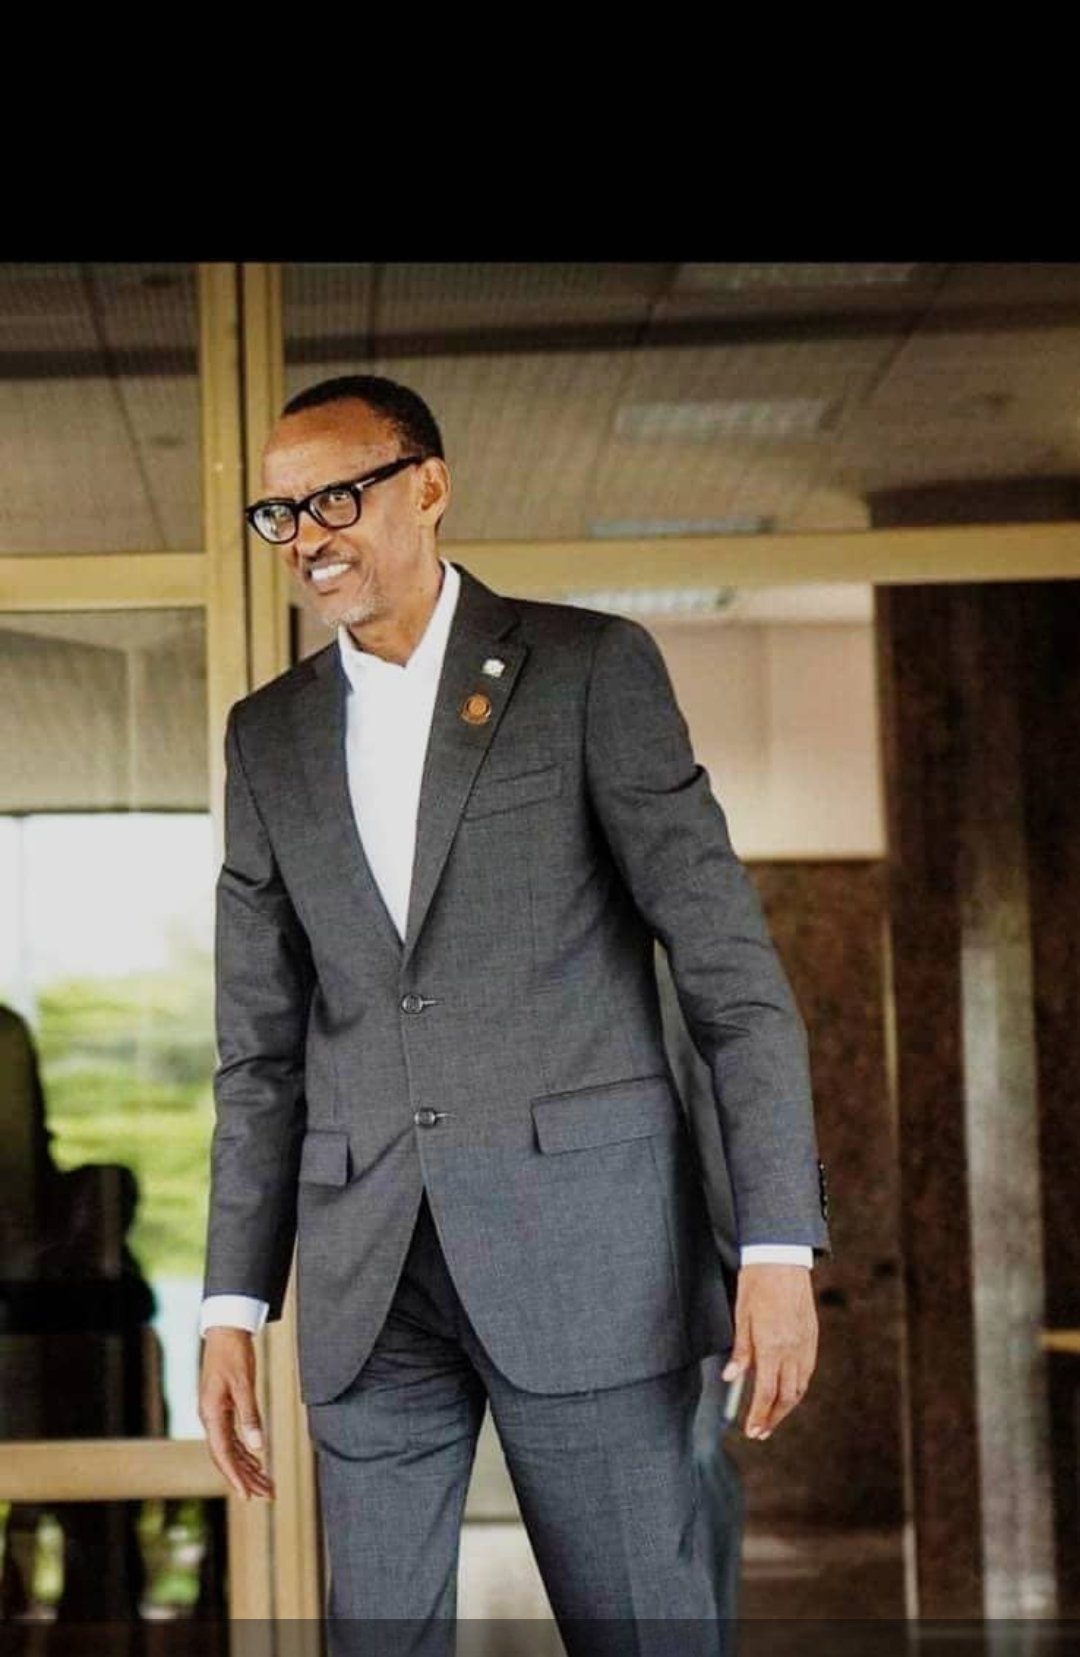 Happy birthday your Excellency Paul Kagame who means alot to Rwandans. 